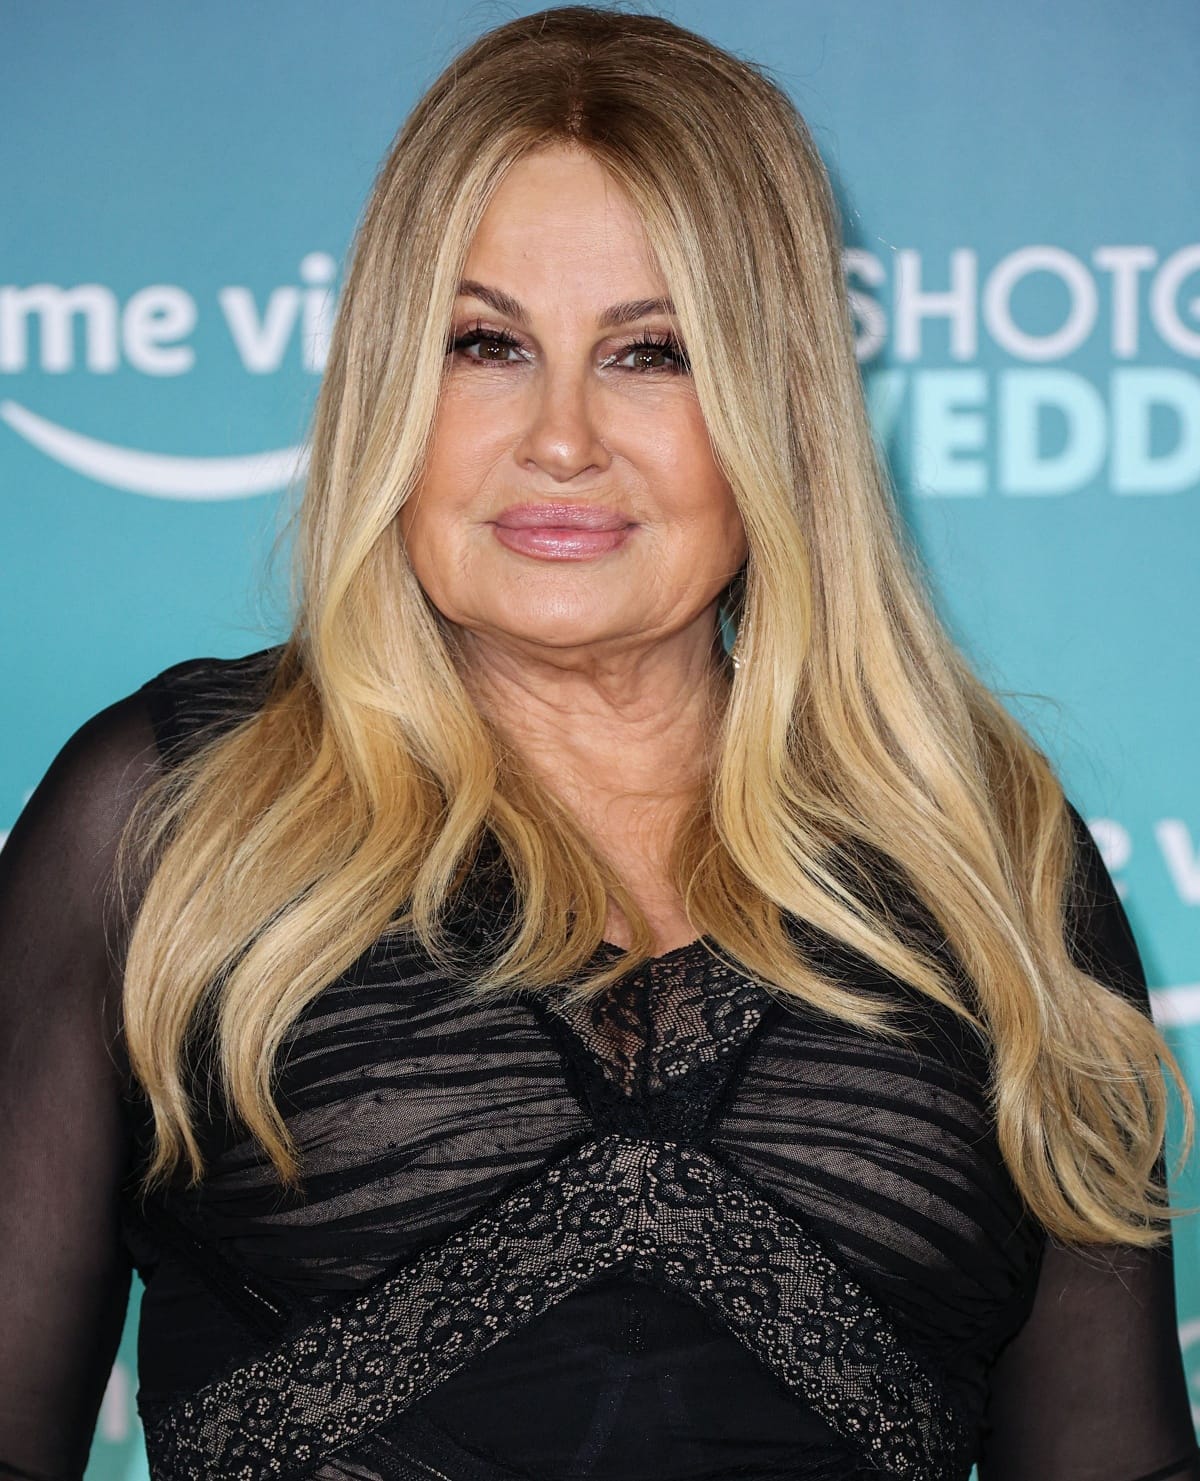 Jennifer Coolidge doesn’t regret lying on her resume because it got her the job that opened many doors for her